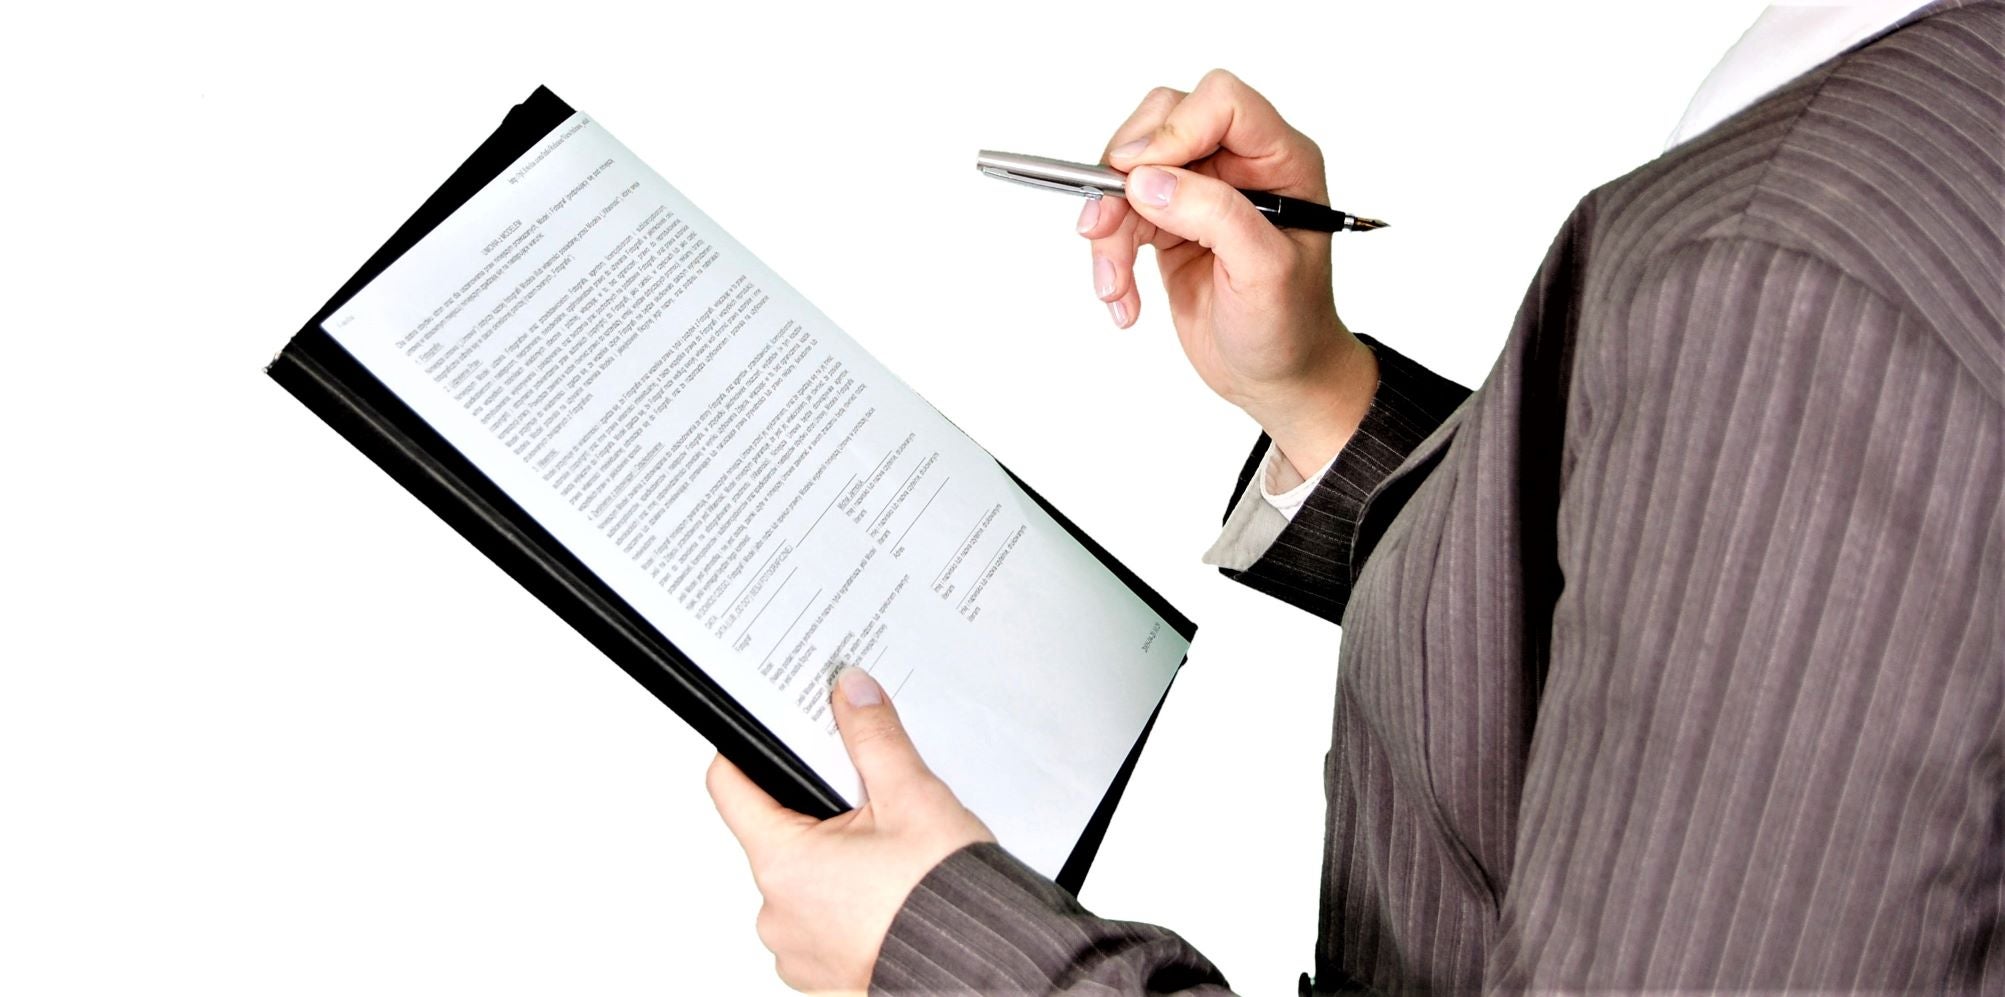 Gov't Lawyers: Electronic Signatures are Binding; No, It's Not 1677 Anymore